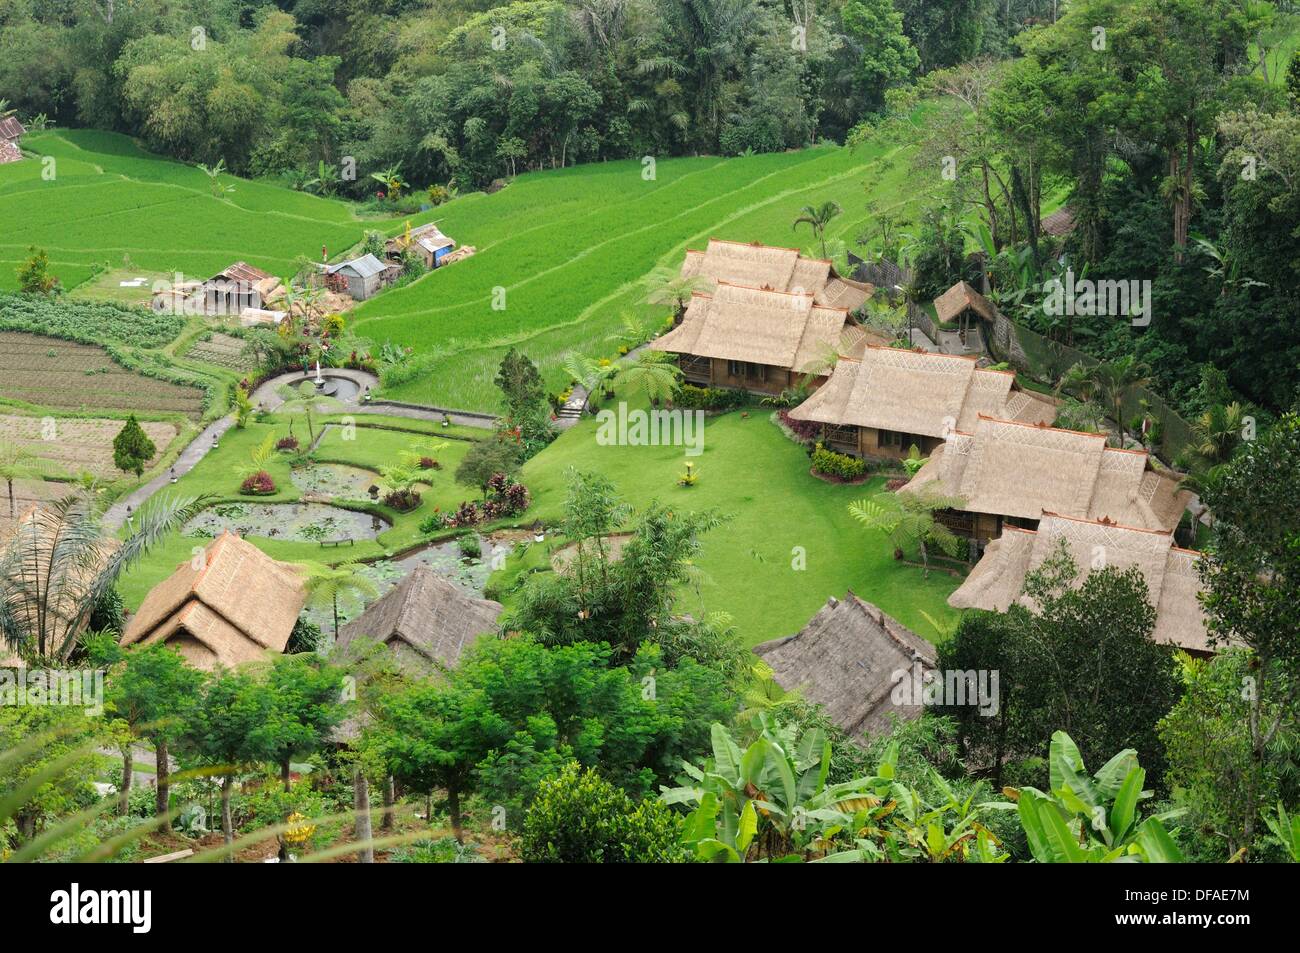 Pacung rice terraces, Bali Stock Photo - Alamy